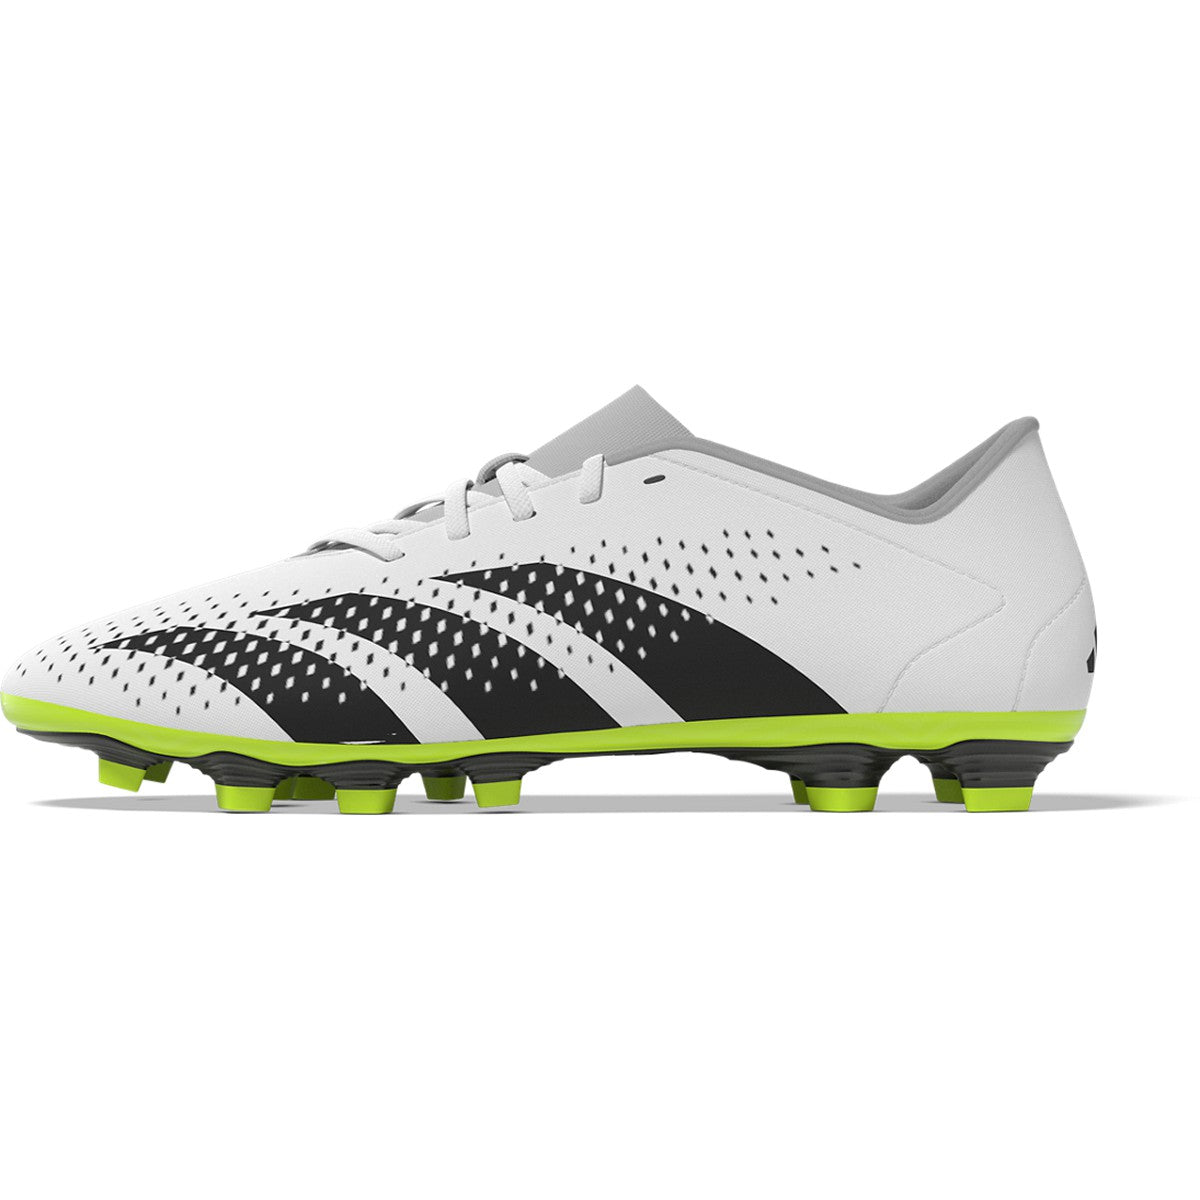 FxG Zone IE9434 – Cleats Cloud adidas Predator Whit Soccer Accuracy.4 Soccer Juniors